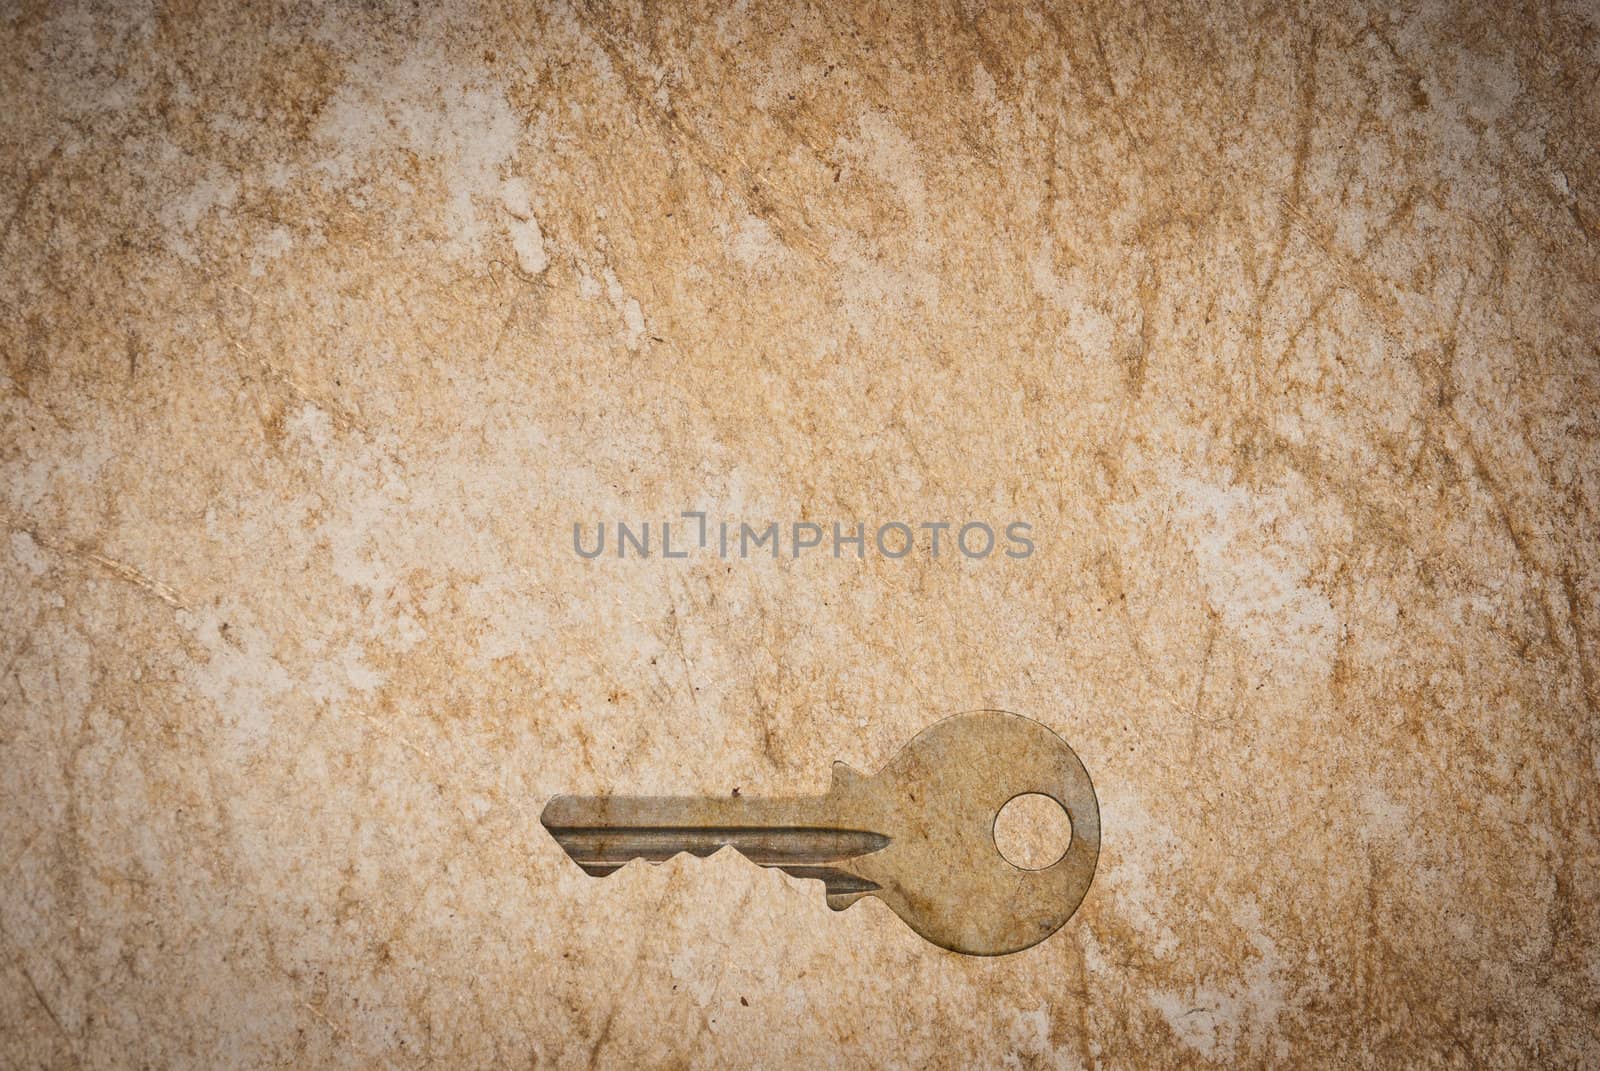 Rusty keys on old paper background with blended layers